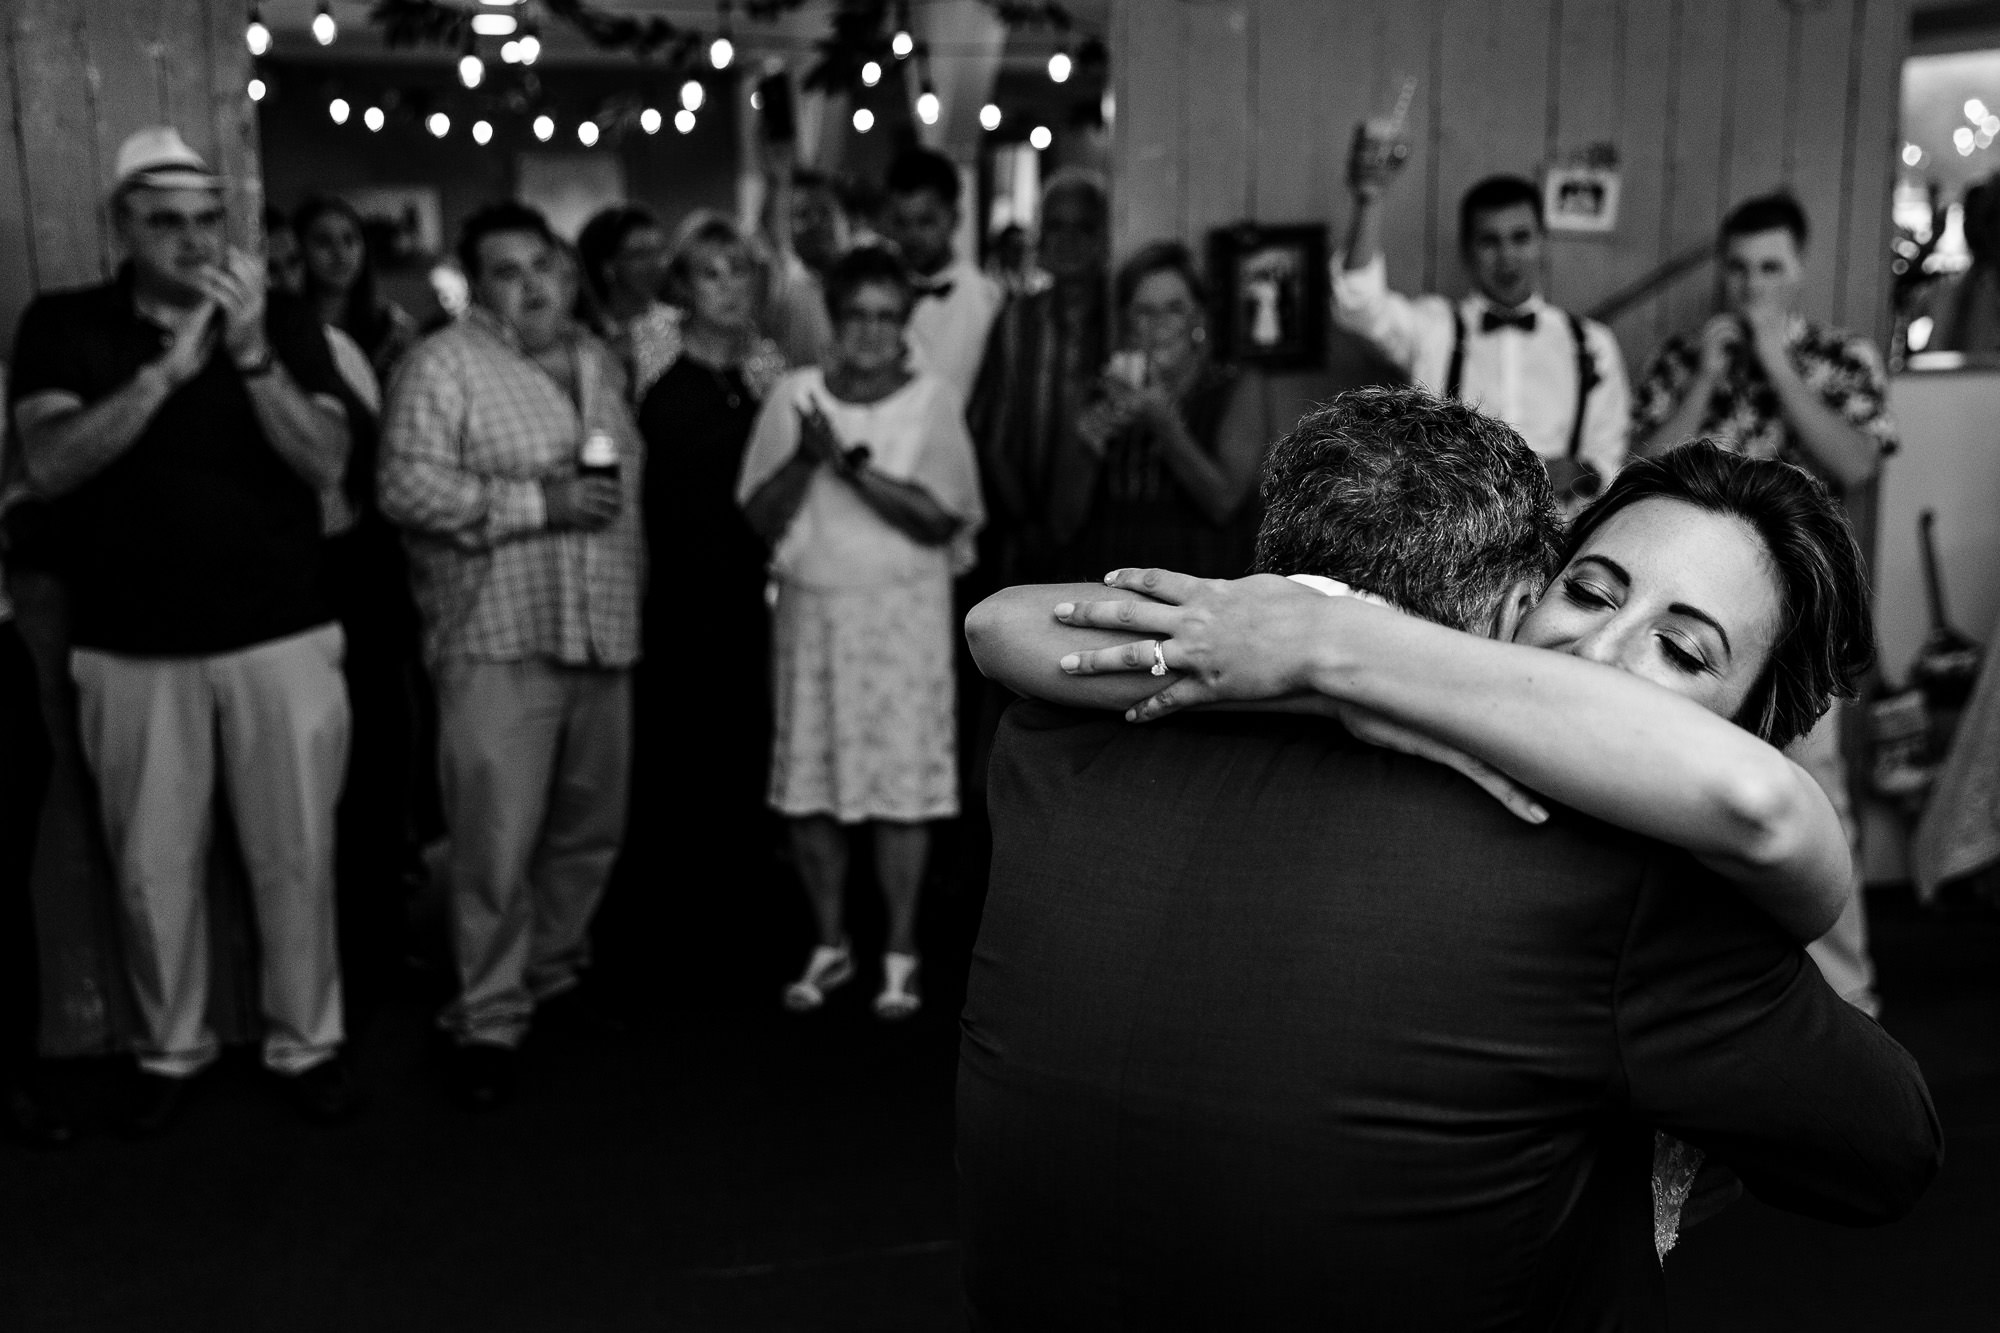 The bride dances with her father at her wedding in New Harbor, Maine